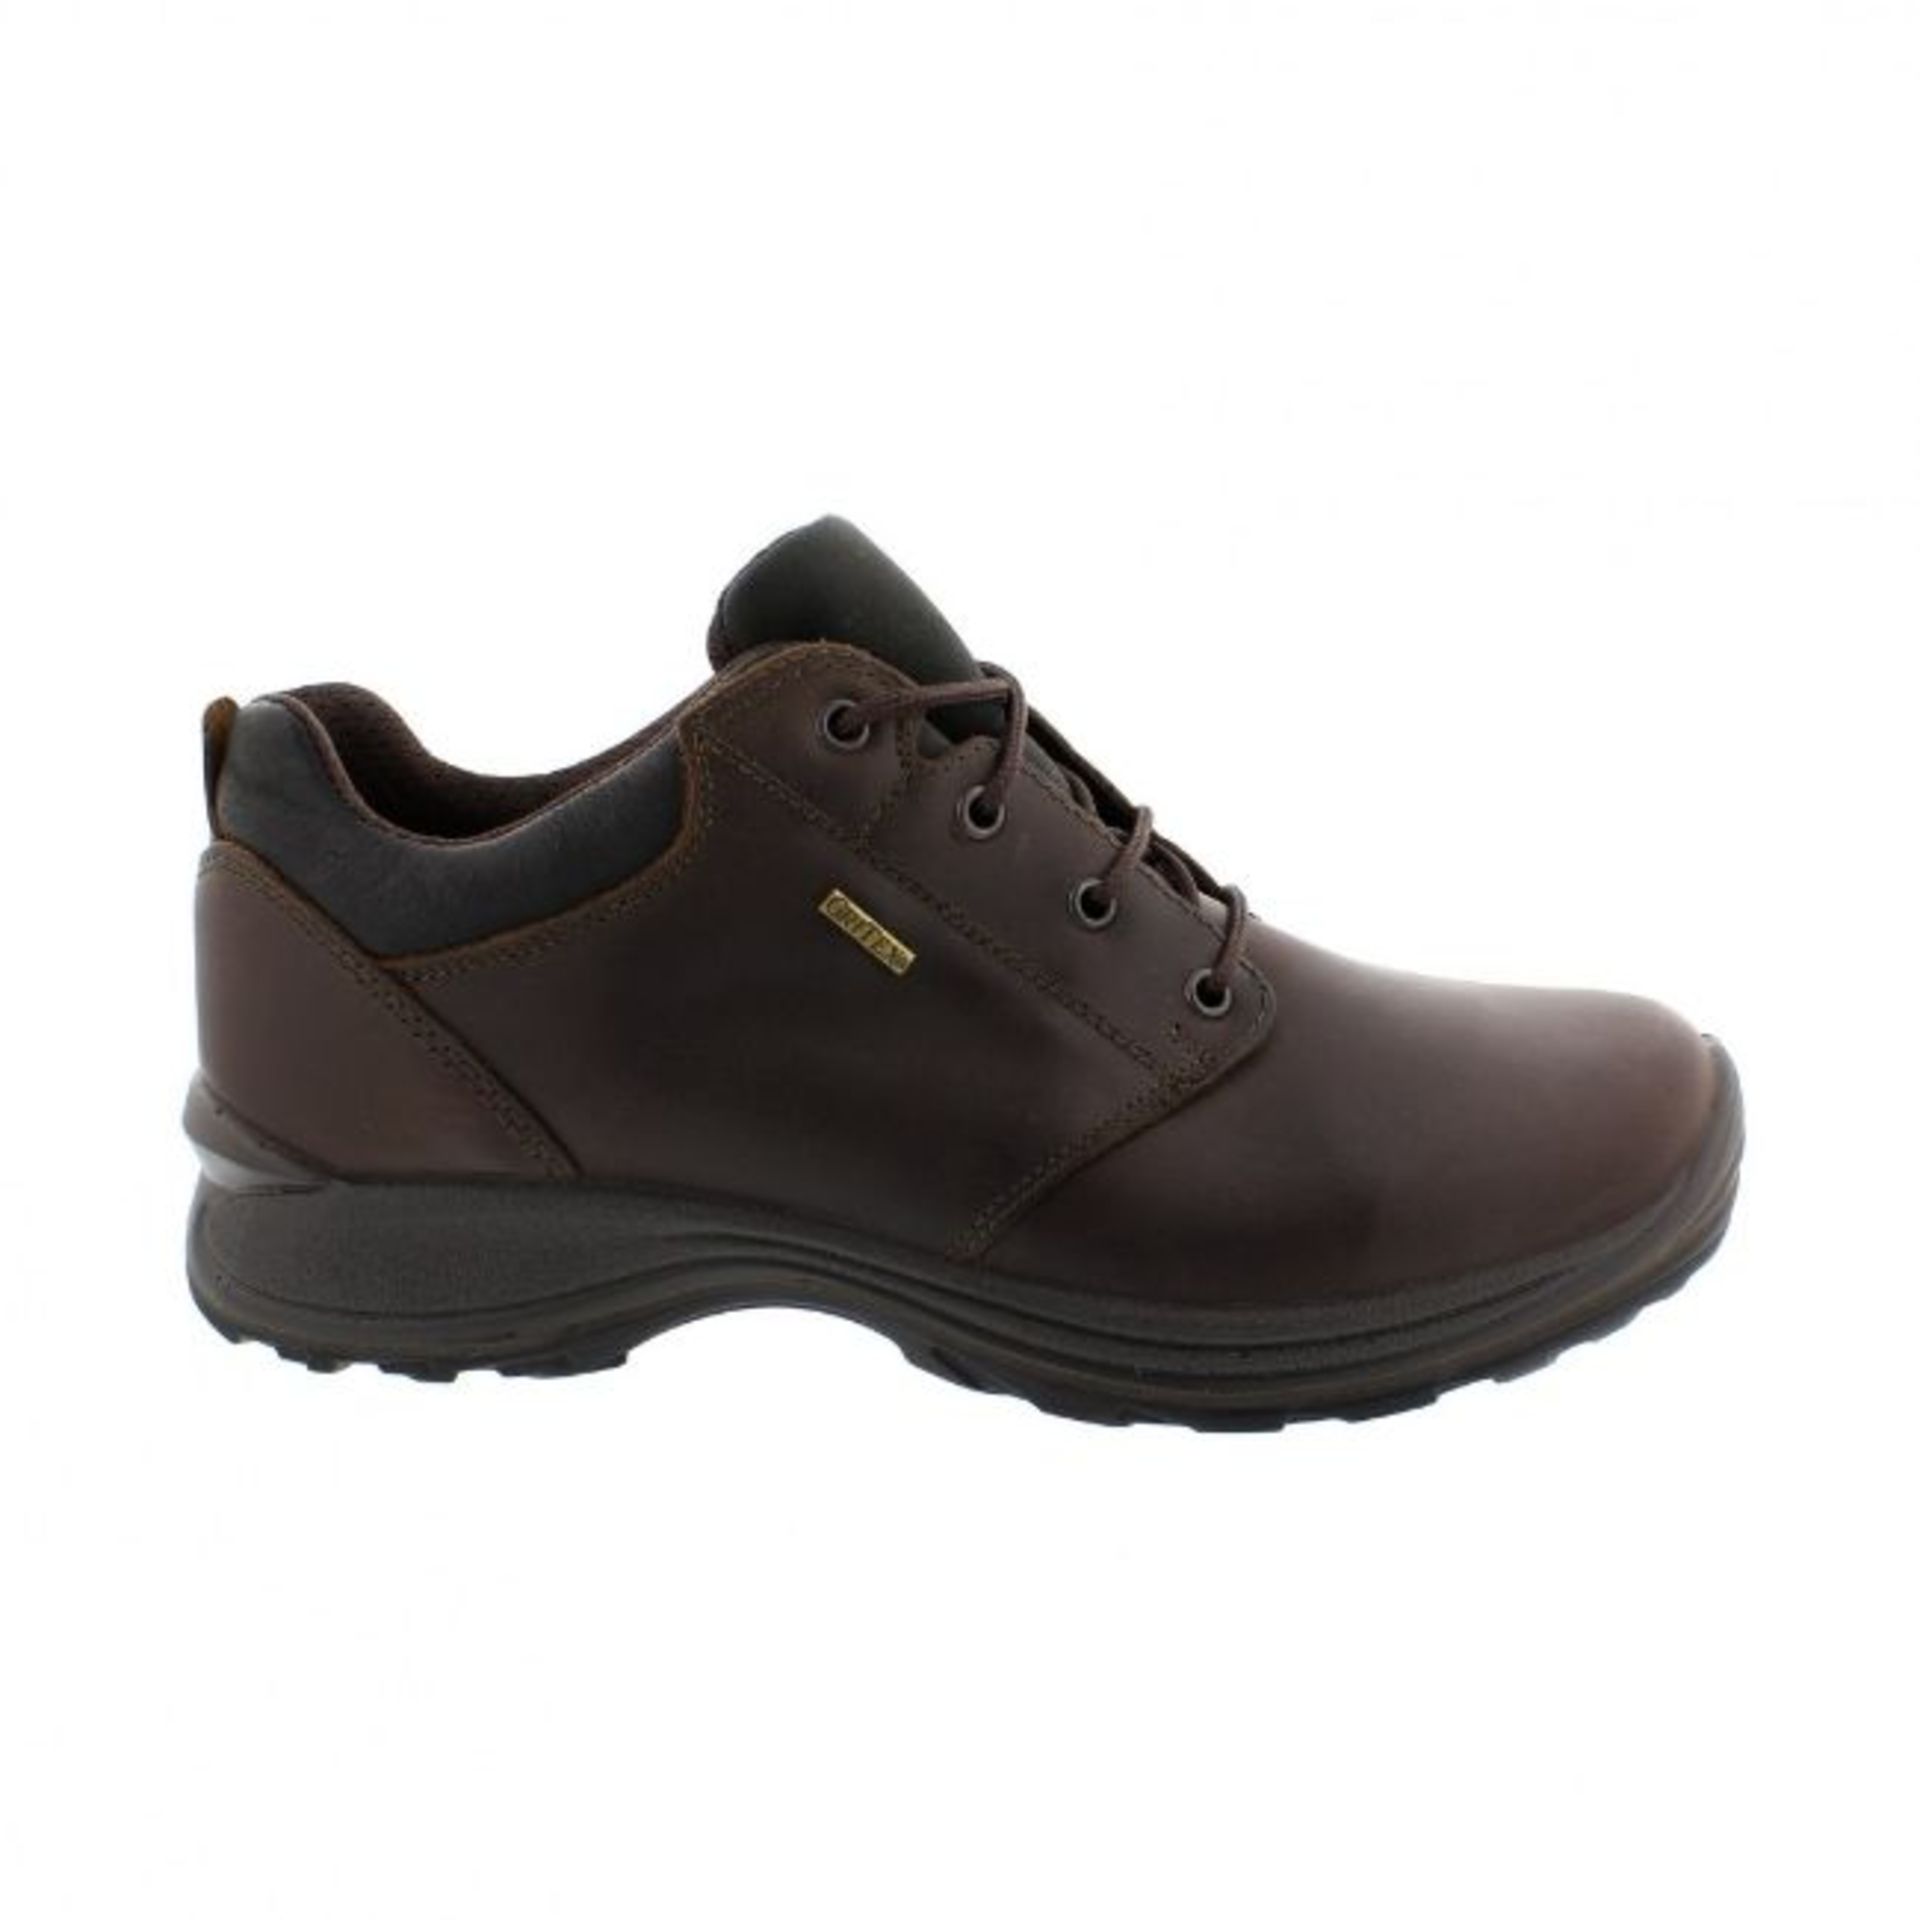 1 x Pair of Men's Grisport Brown Leather GriTex Shoes - Rogerson Footwear - Brand New and Boxed - - Image 8 of 8